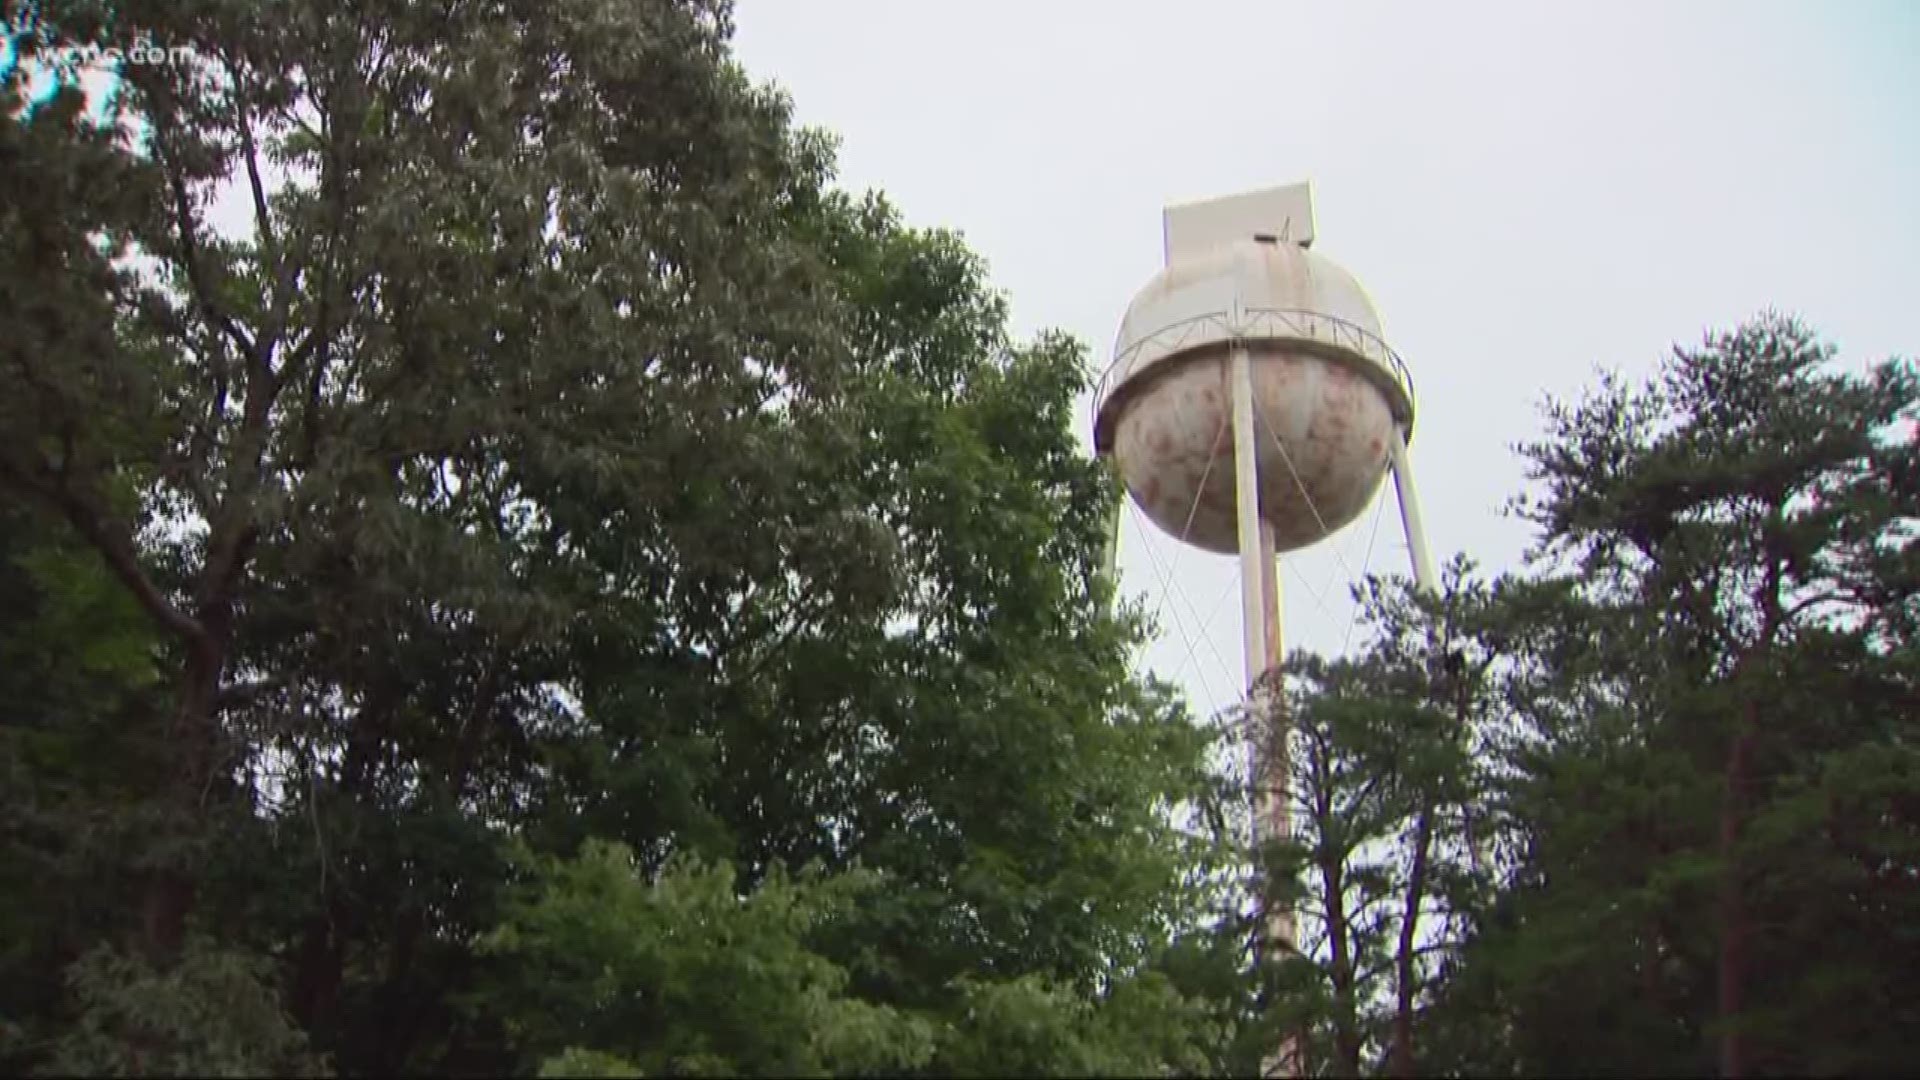 The water tower owner has yet to respond to calls